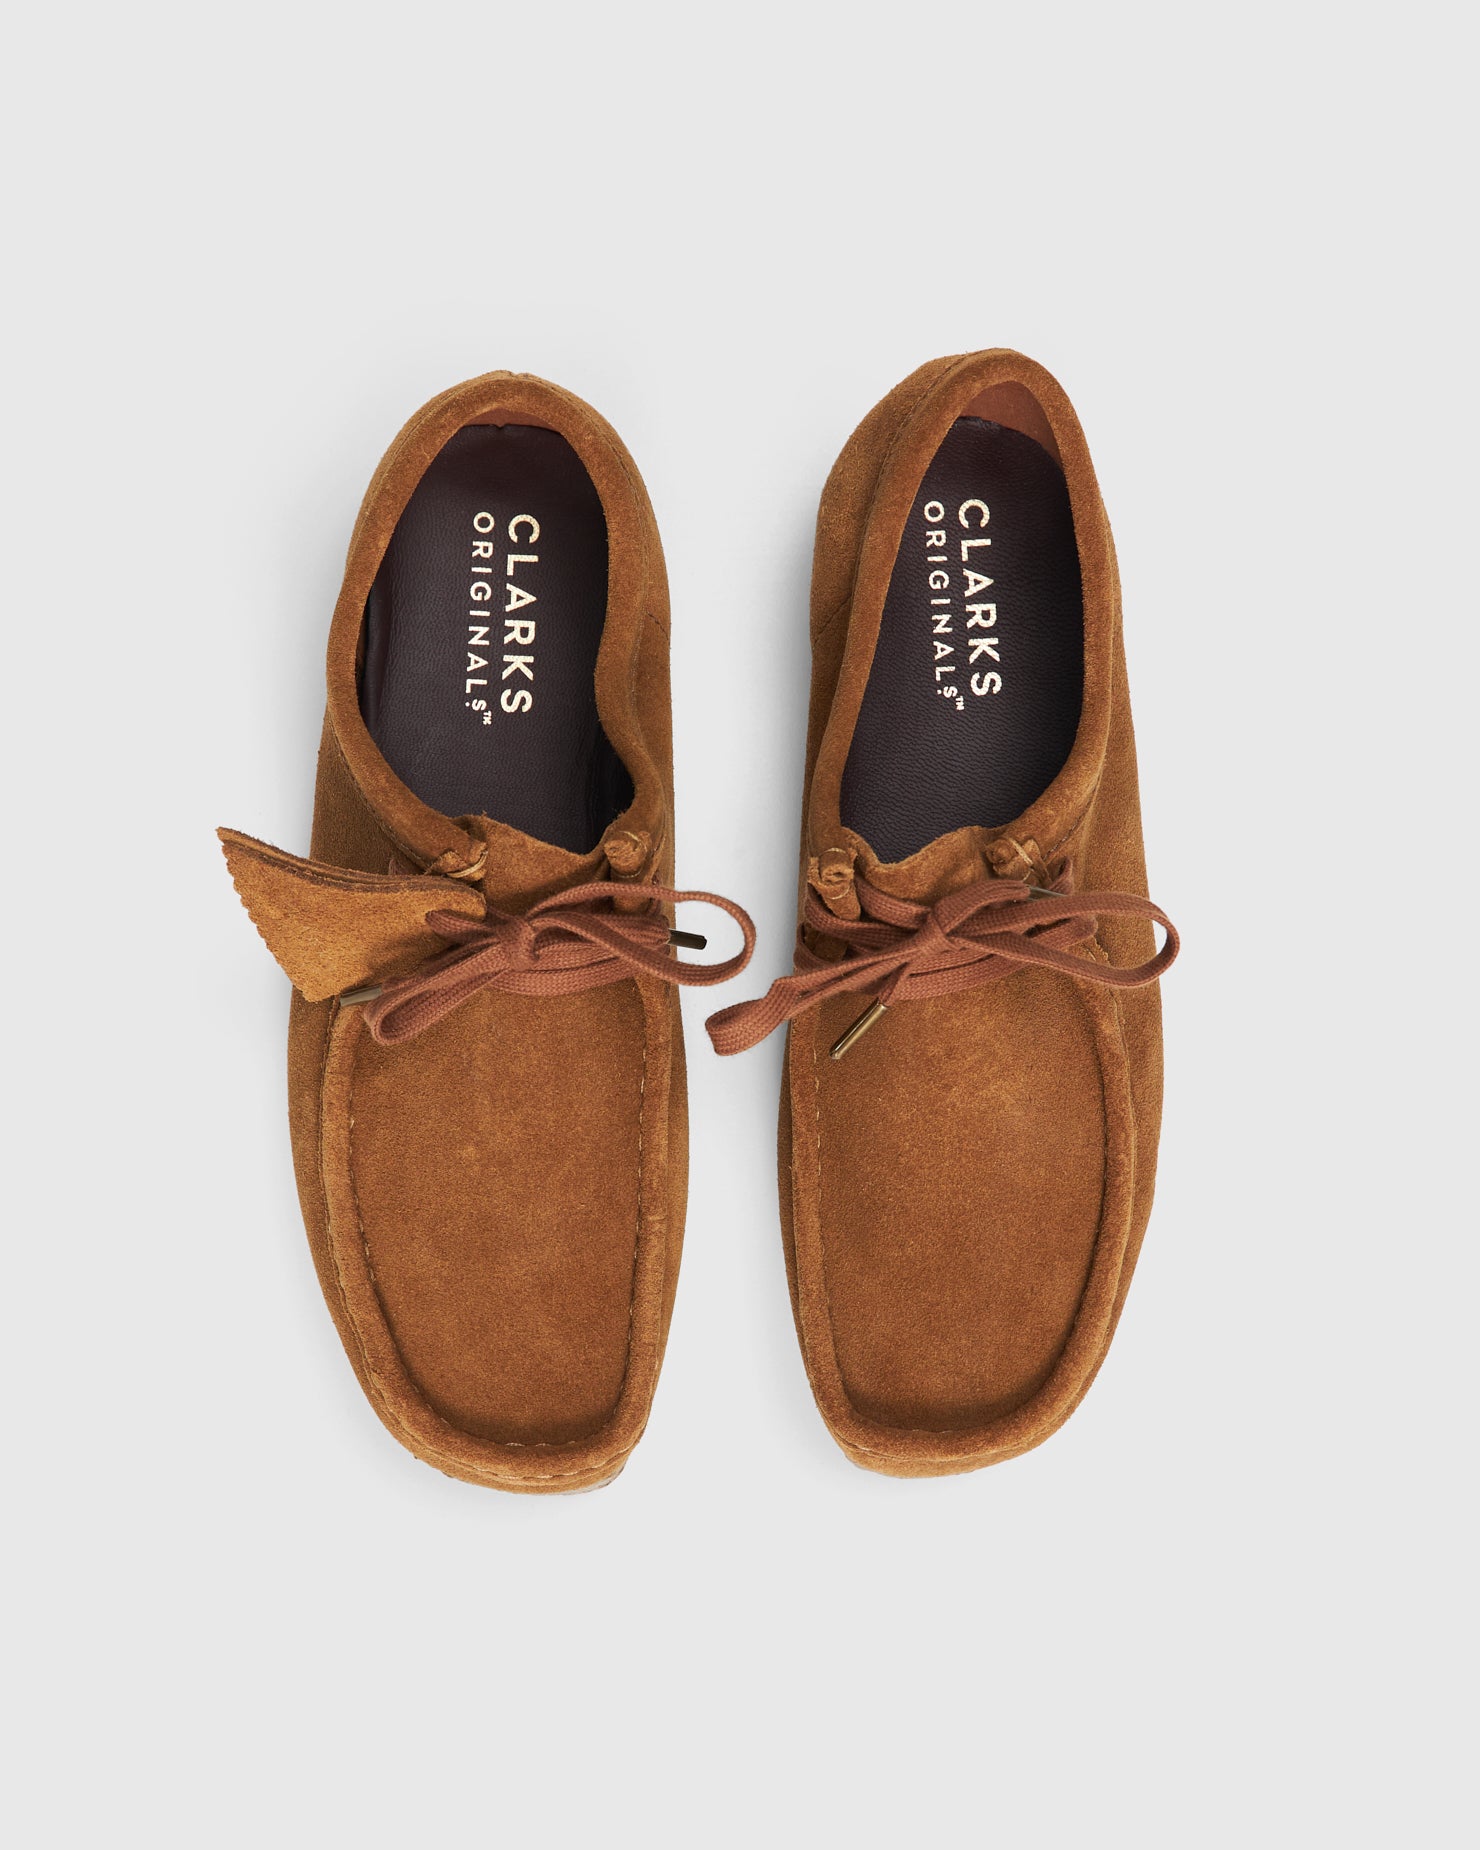 Wallabee in Cola